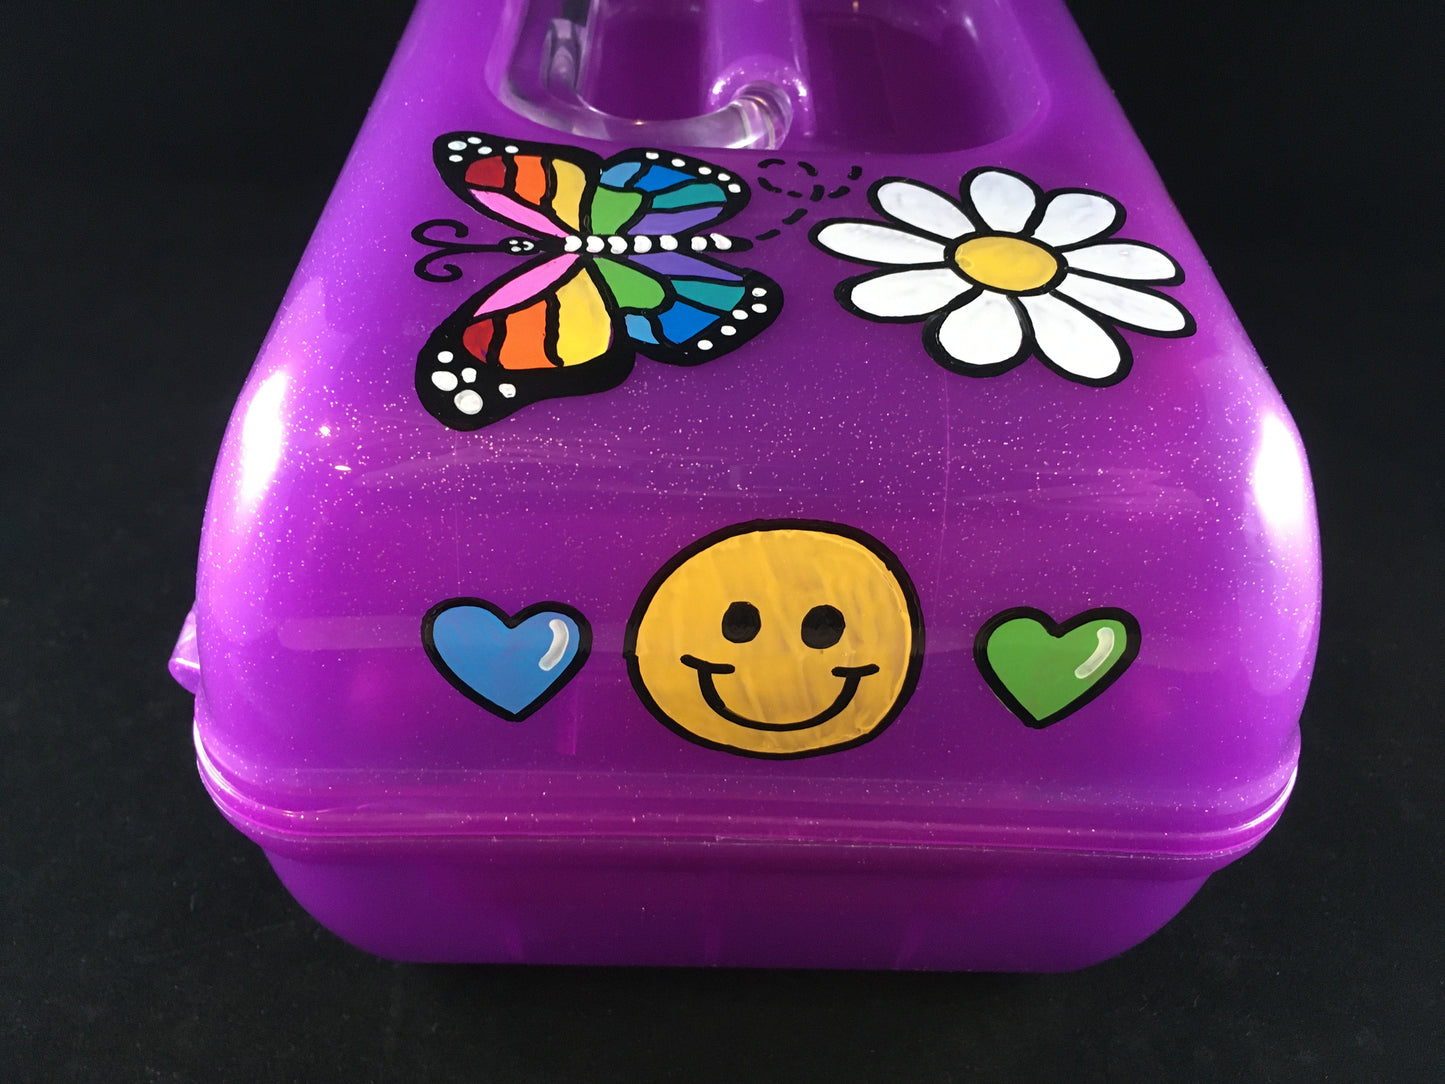 "Alexa" hand-painted personalized caboodle